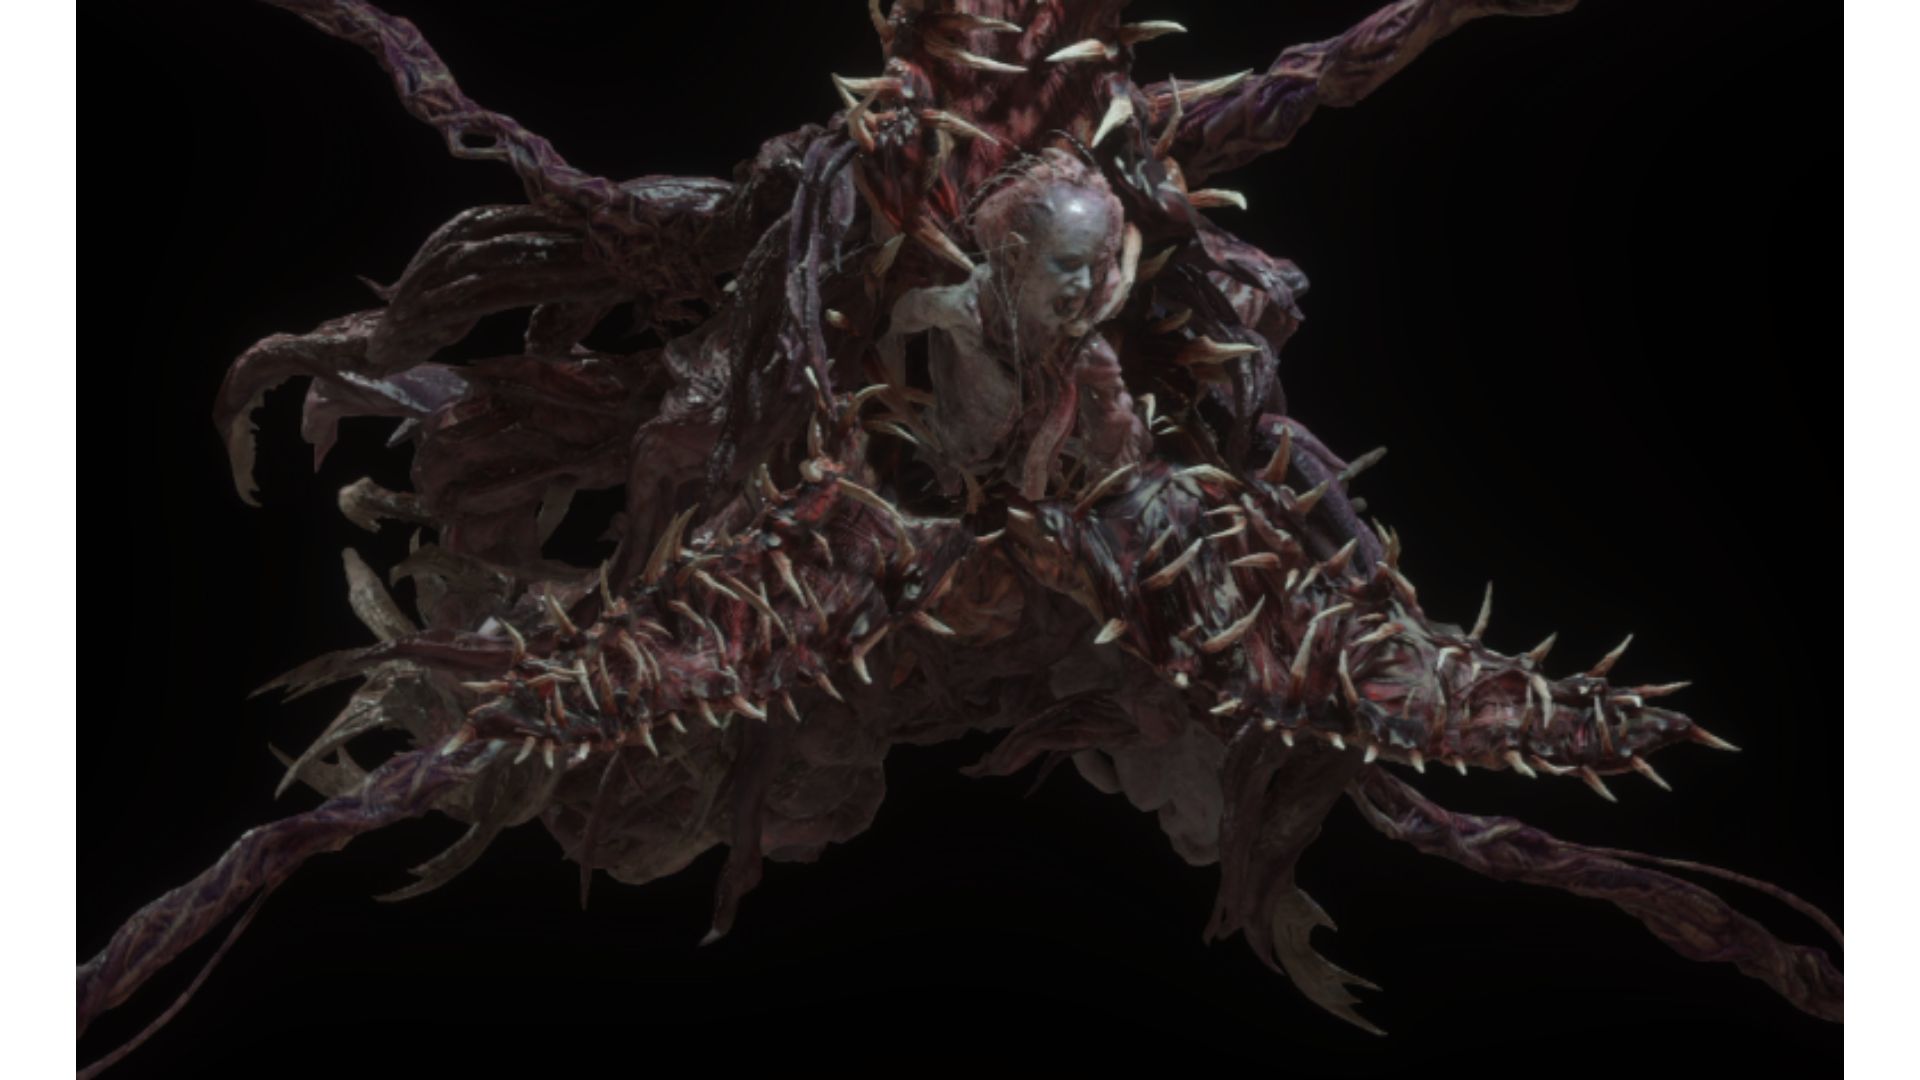 Resident Evil 4 Remake Bosses: Salazar can be seen